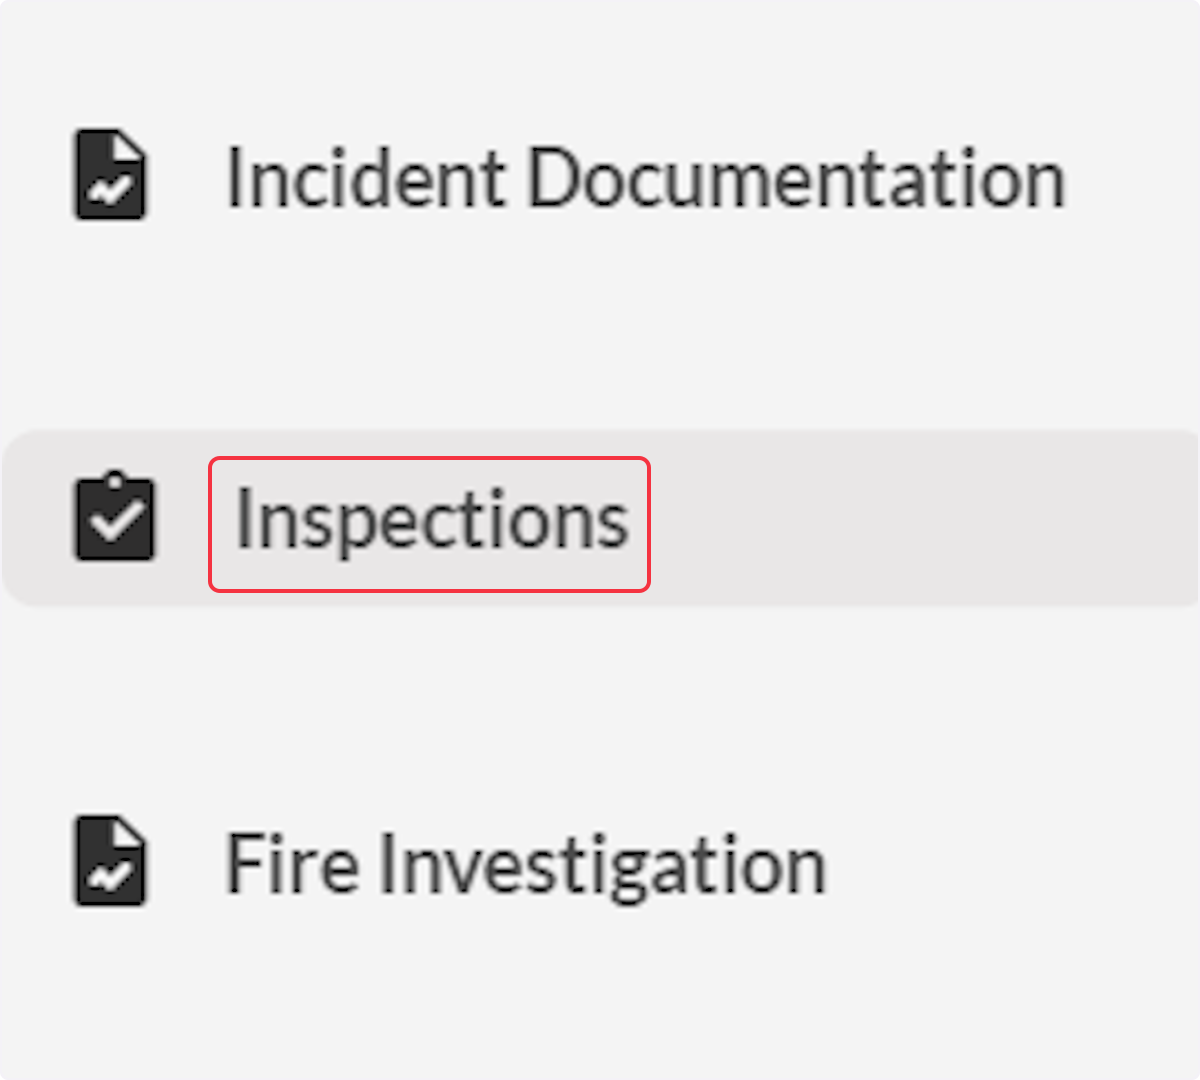 Click on Inspections.